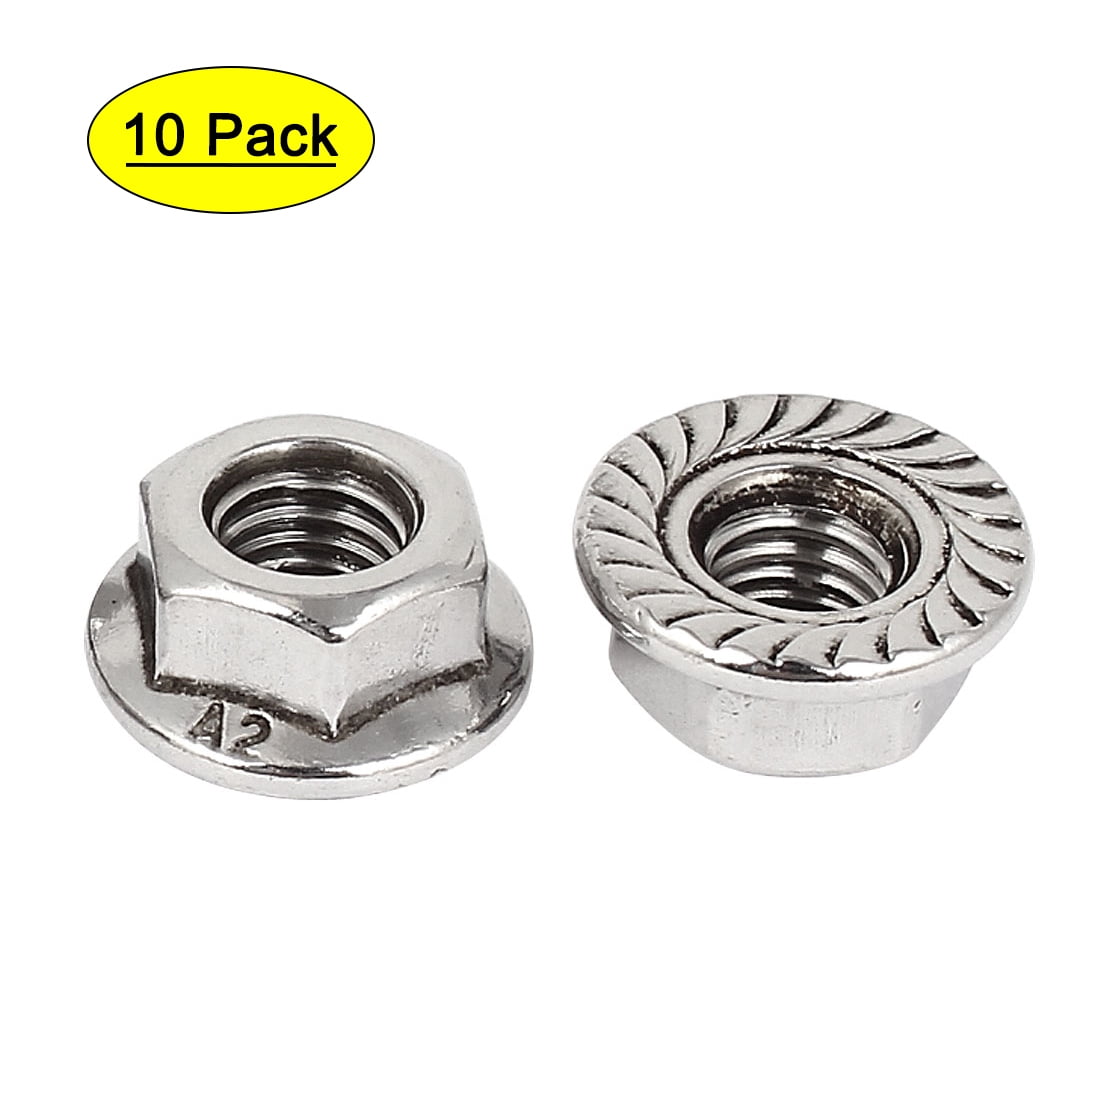 4 x 3/8" UNF Zinc Plated Serrated Flange Lock Nuts Fine 24TPI Imperial Thread 